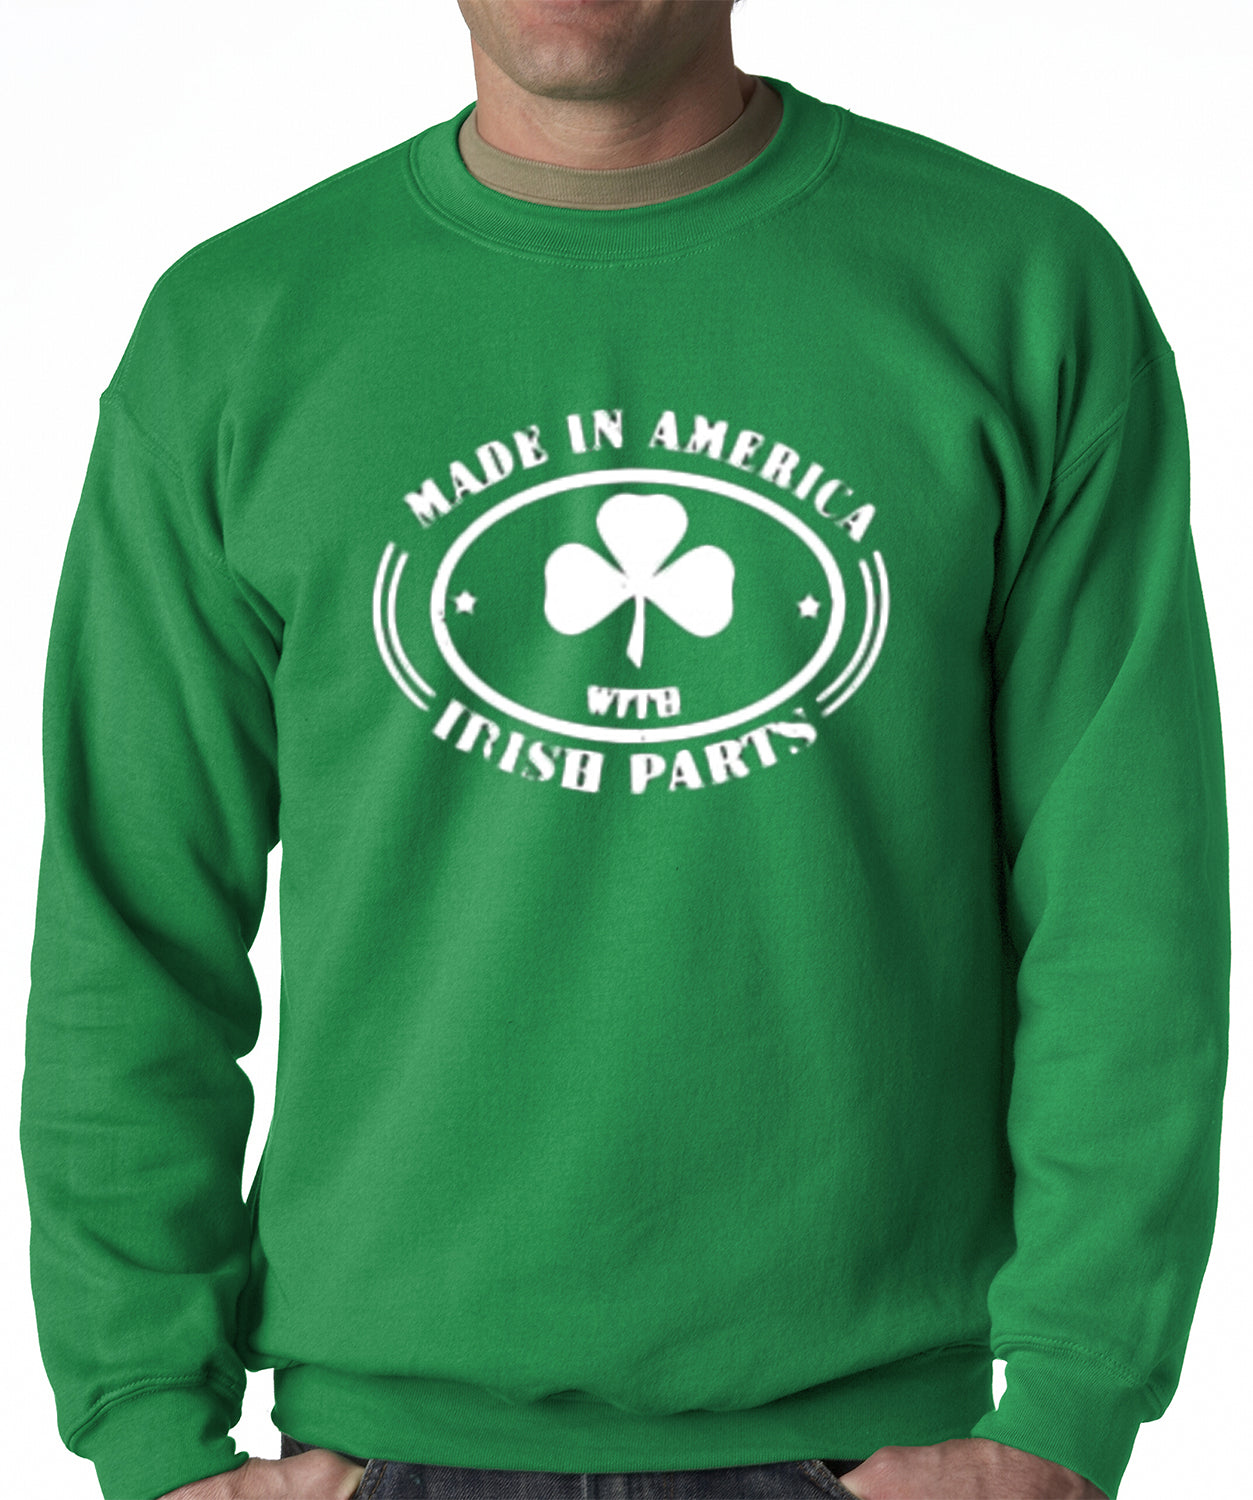 Made In America With Irish Parts Adult Crewneck